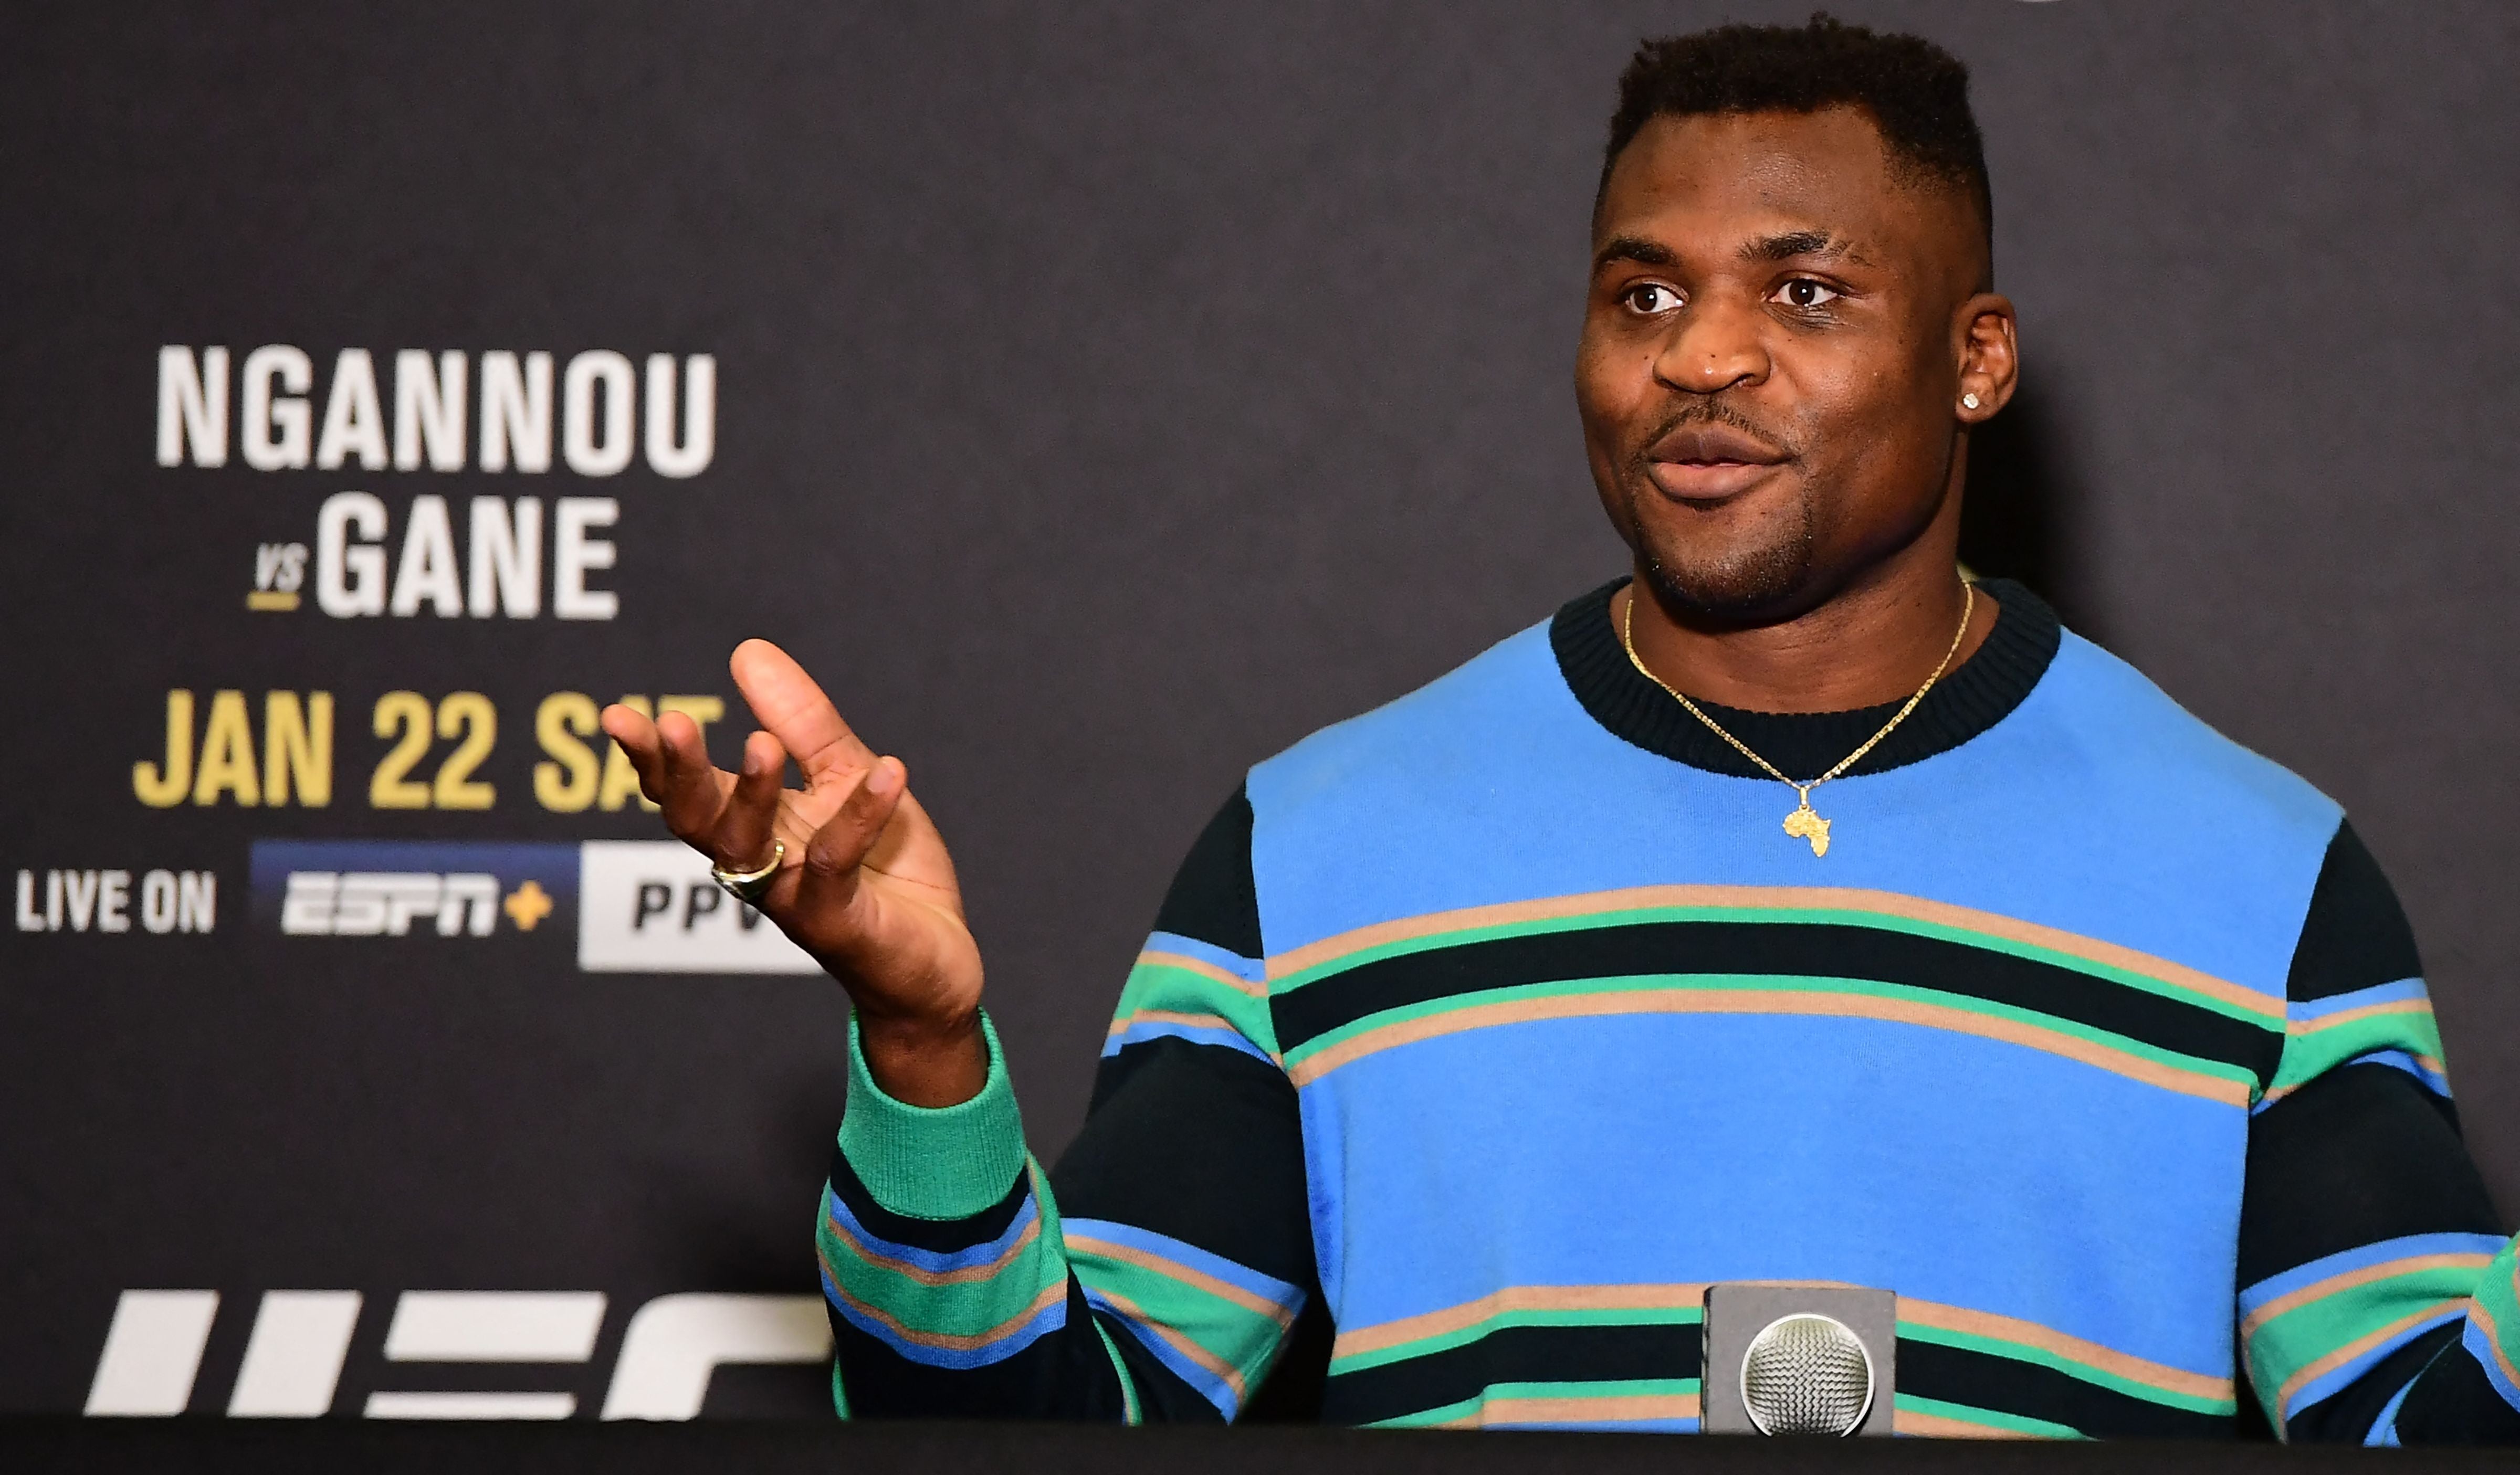 Francis Ngannou speaking in Anaheim ahead of his UFC 270